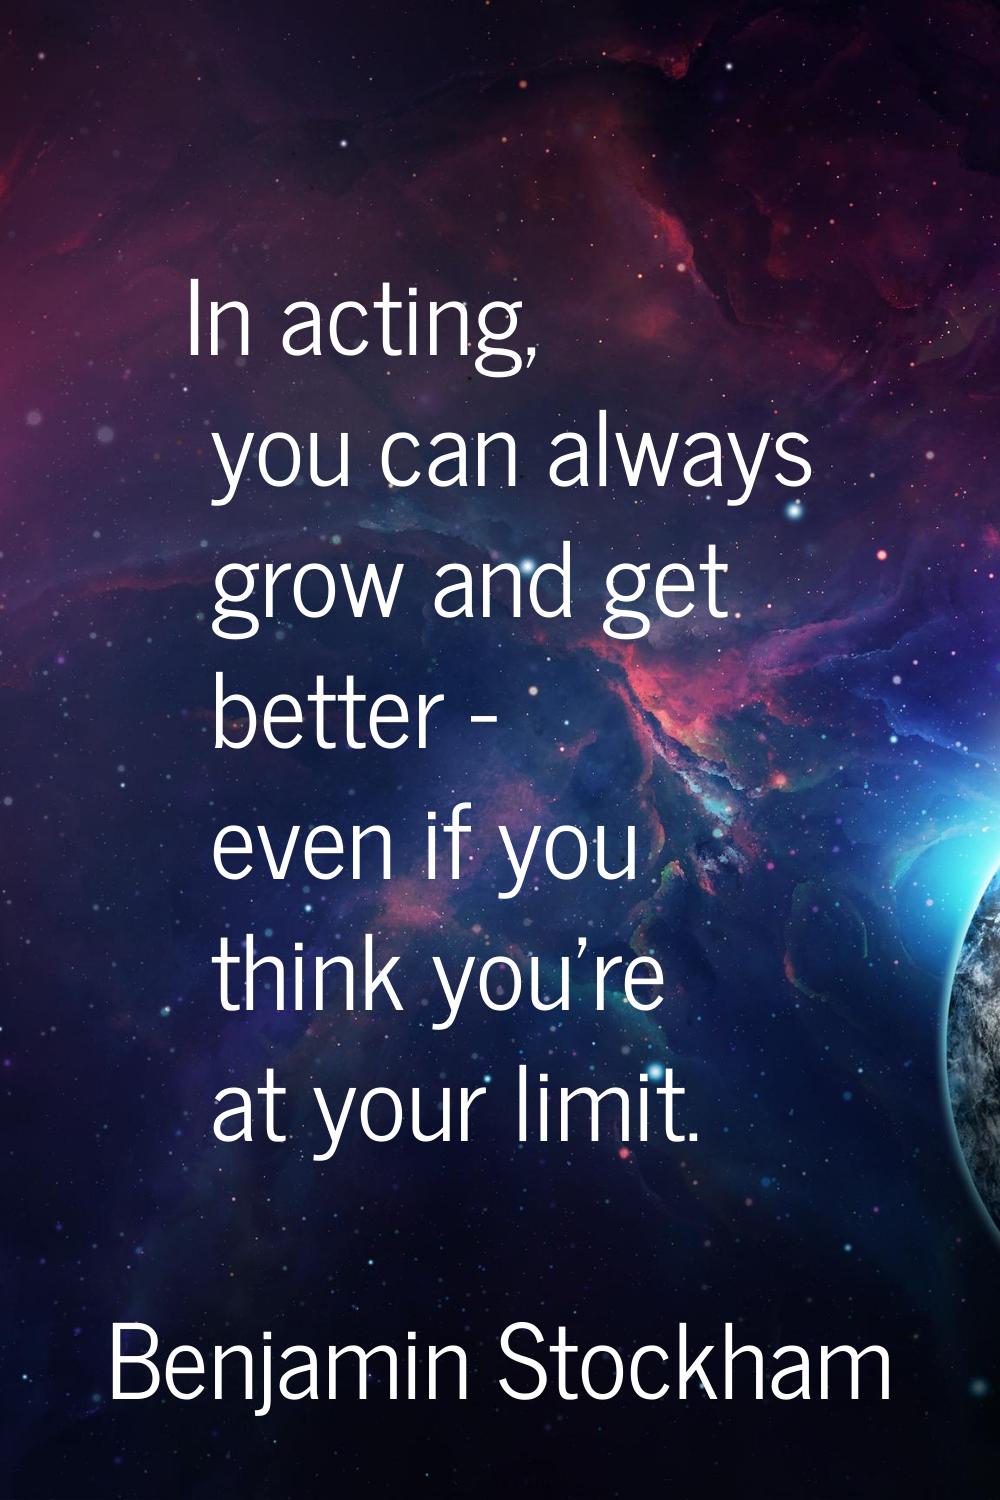 In acting, you can always grow and get better - even if you think you're at your limit.